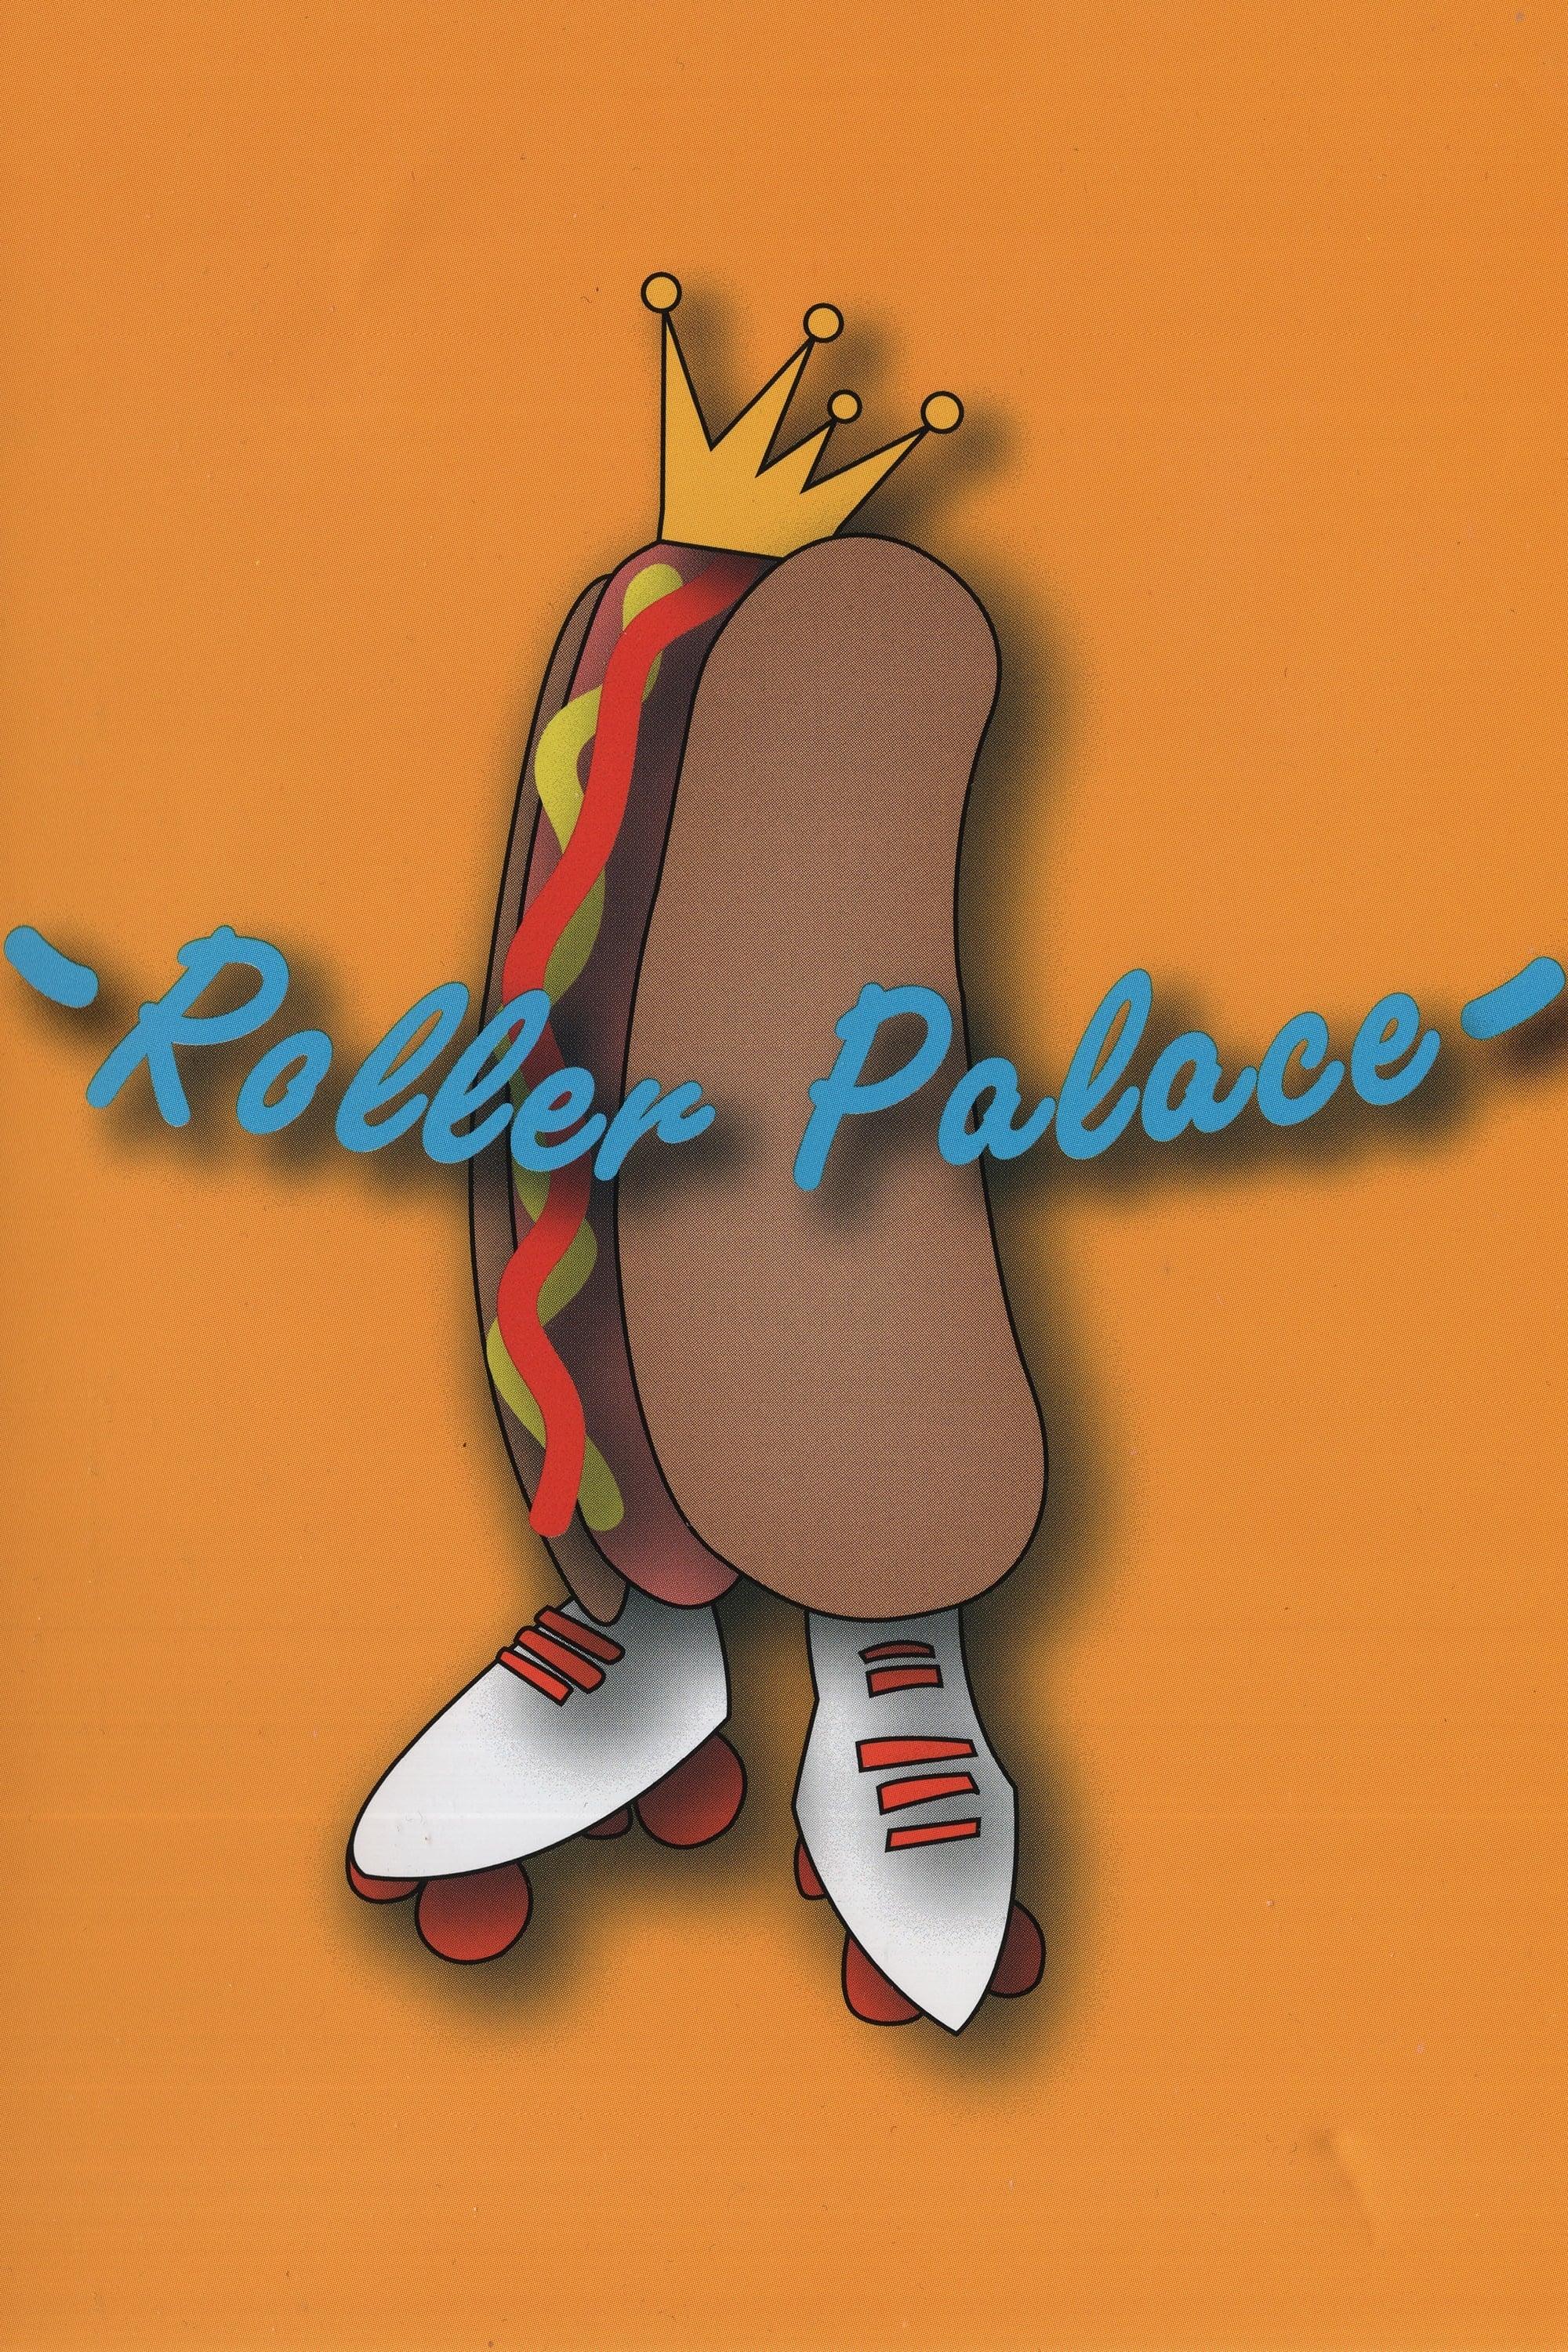 Roller Palace poster